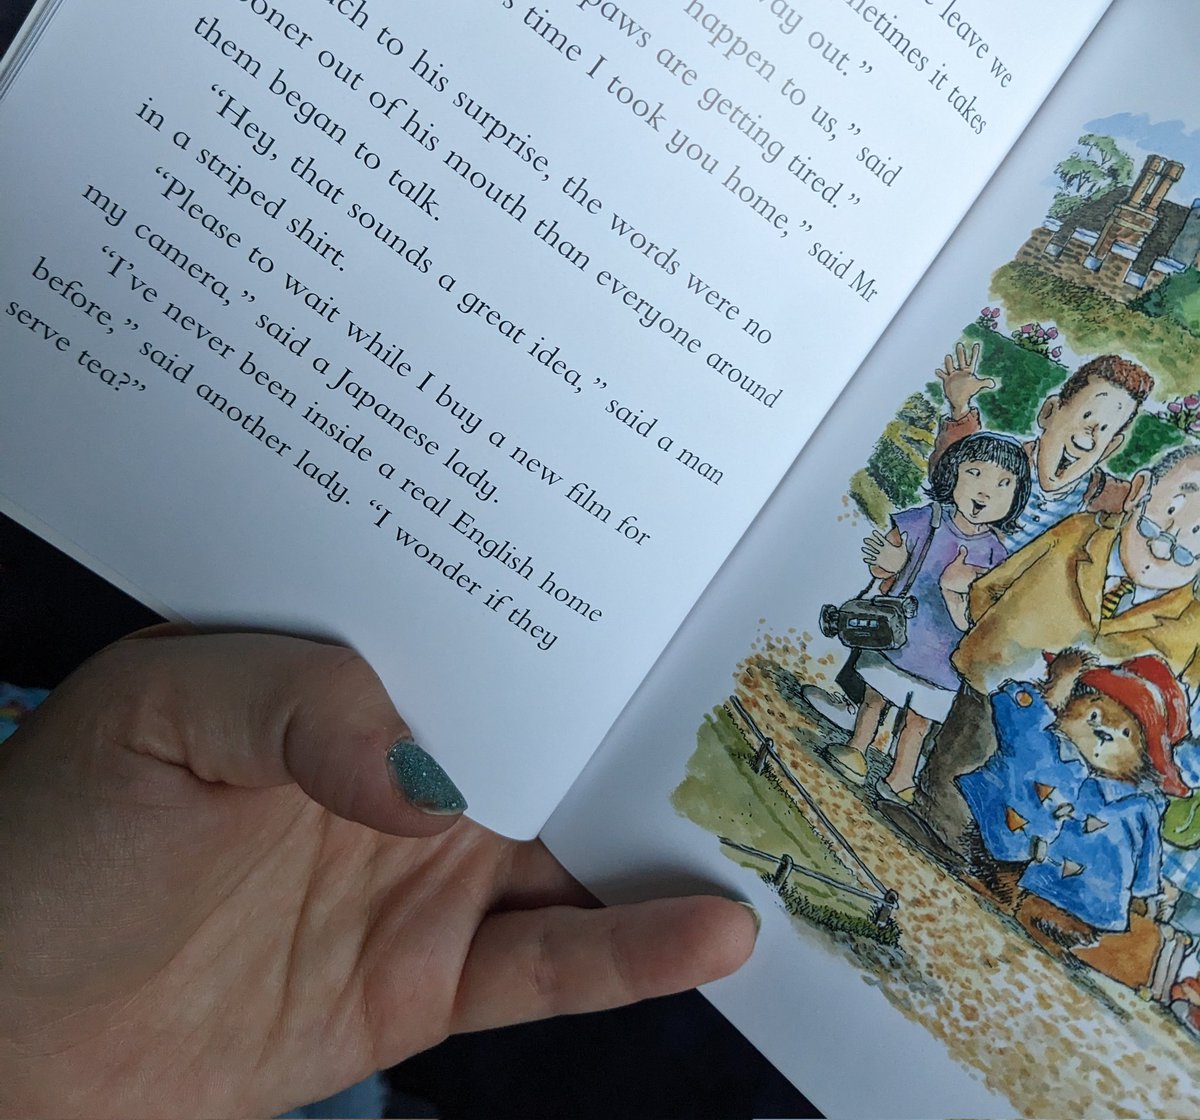 The #casualracism in the @HarperCollinsUK Paddington's suitcase book 'Marmalade Maze' could probably do with a rewrite for this century...